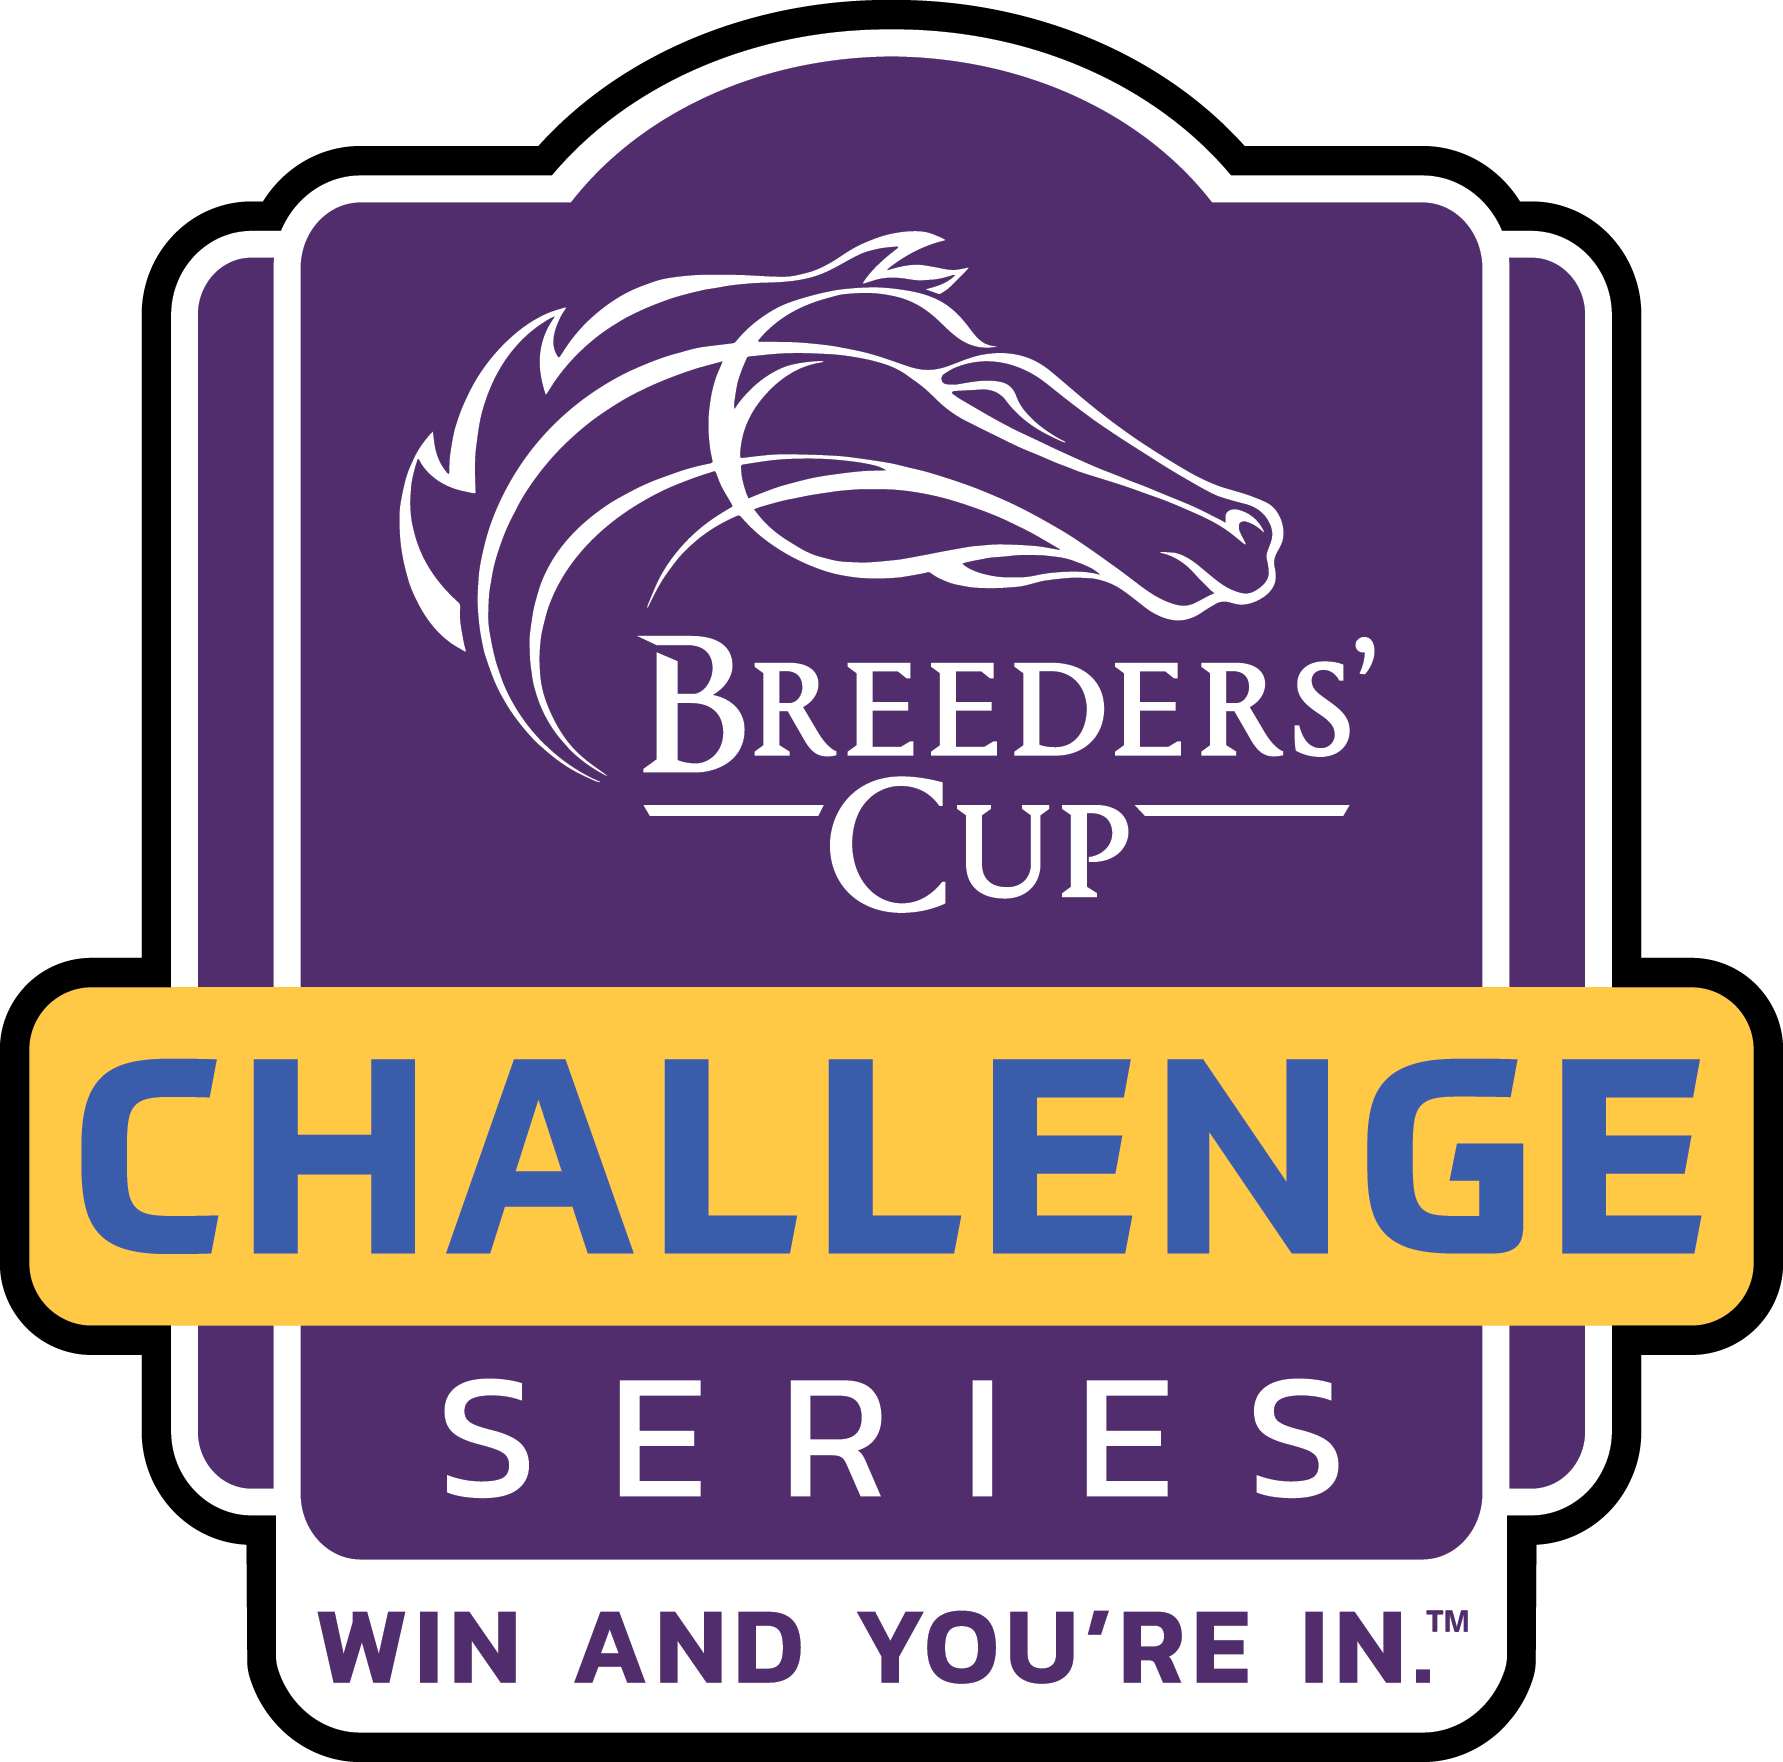 Breeders cup betting challenge 2022 results of tecfidera pro football betting blogger